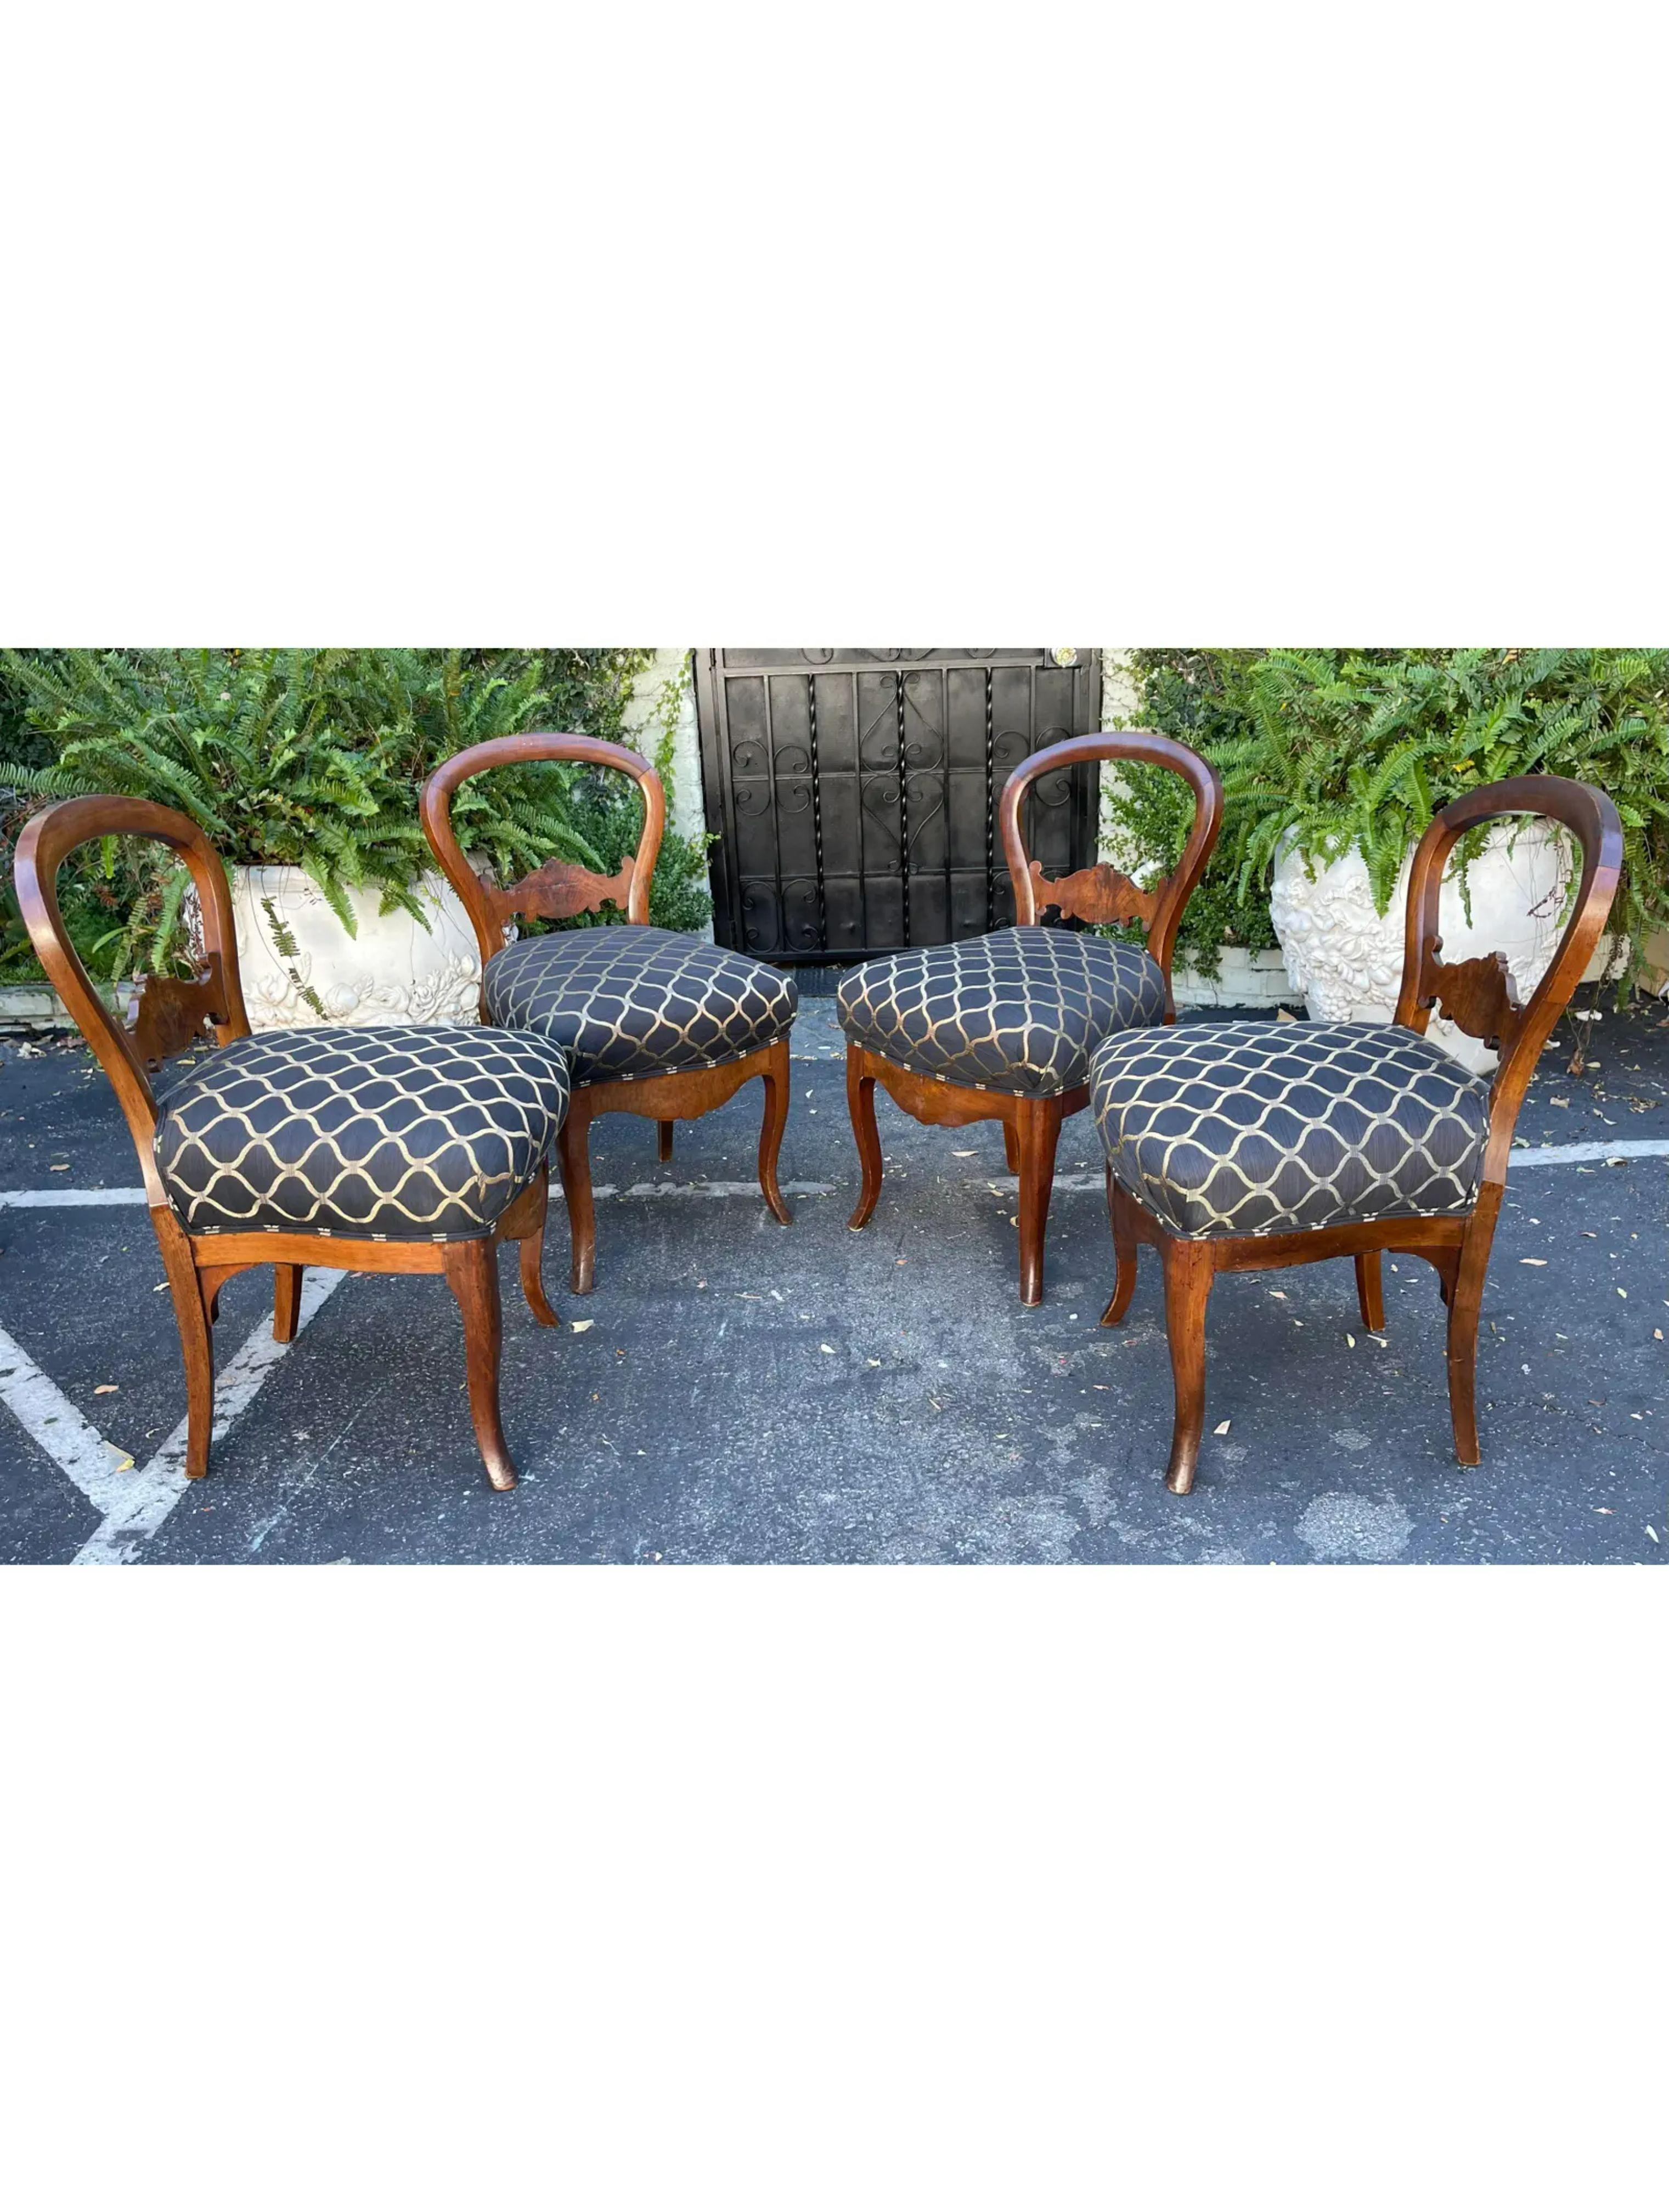 Antique Regency Period Mahogany Dining Chairs, Early 19th Century For Sale 2